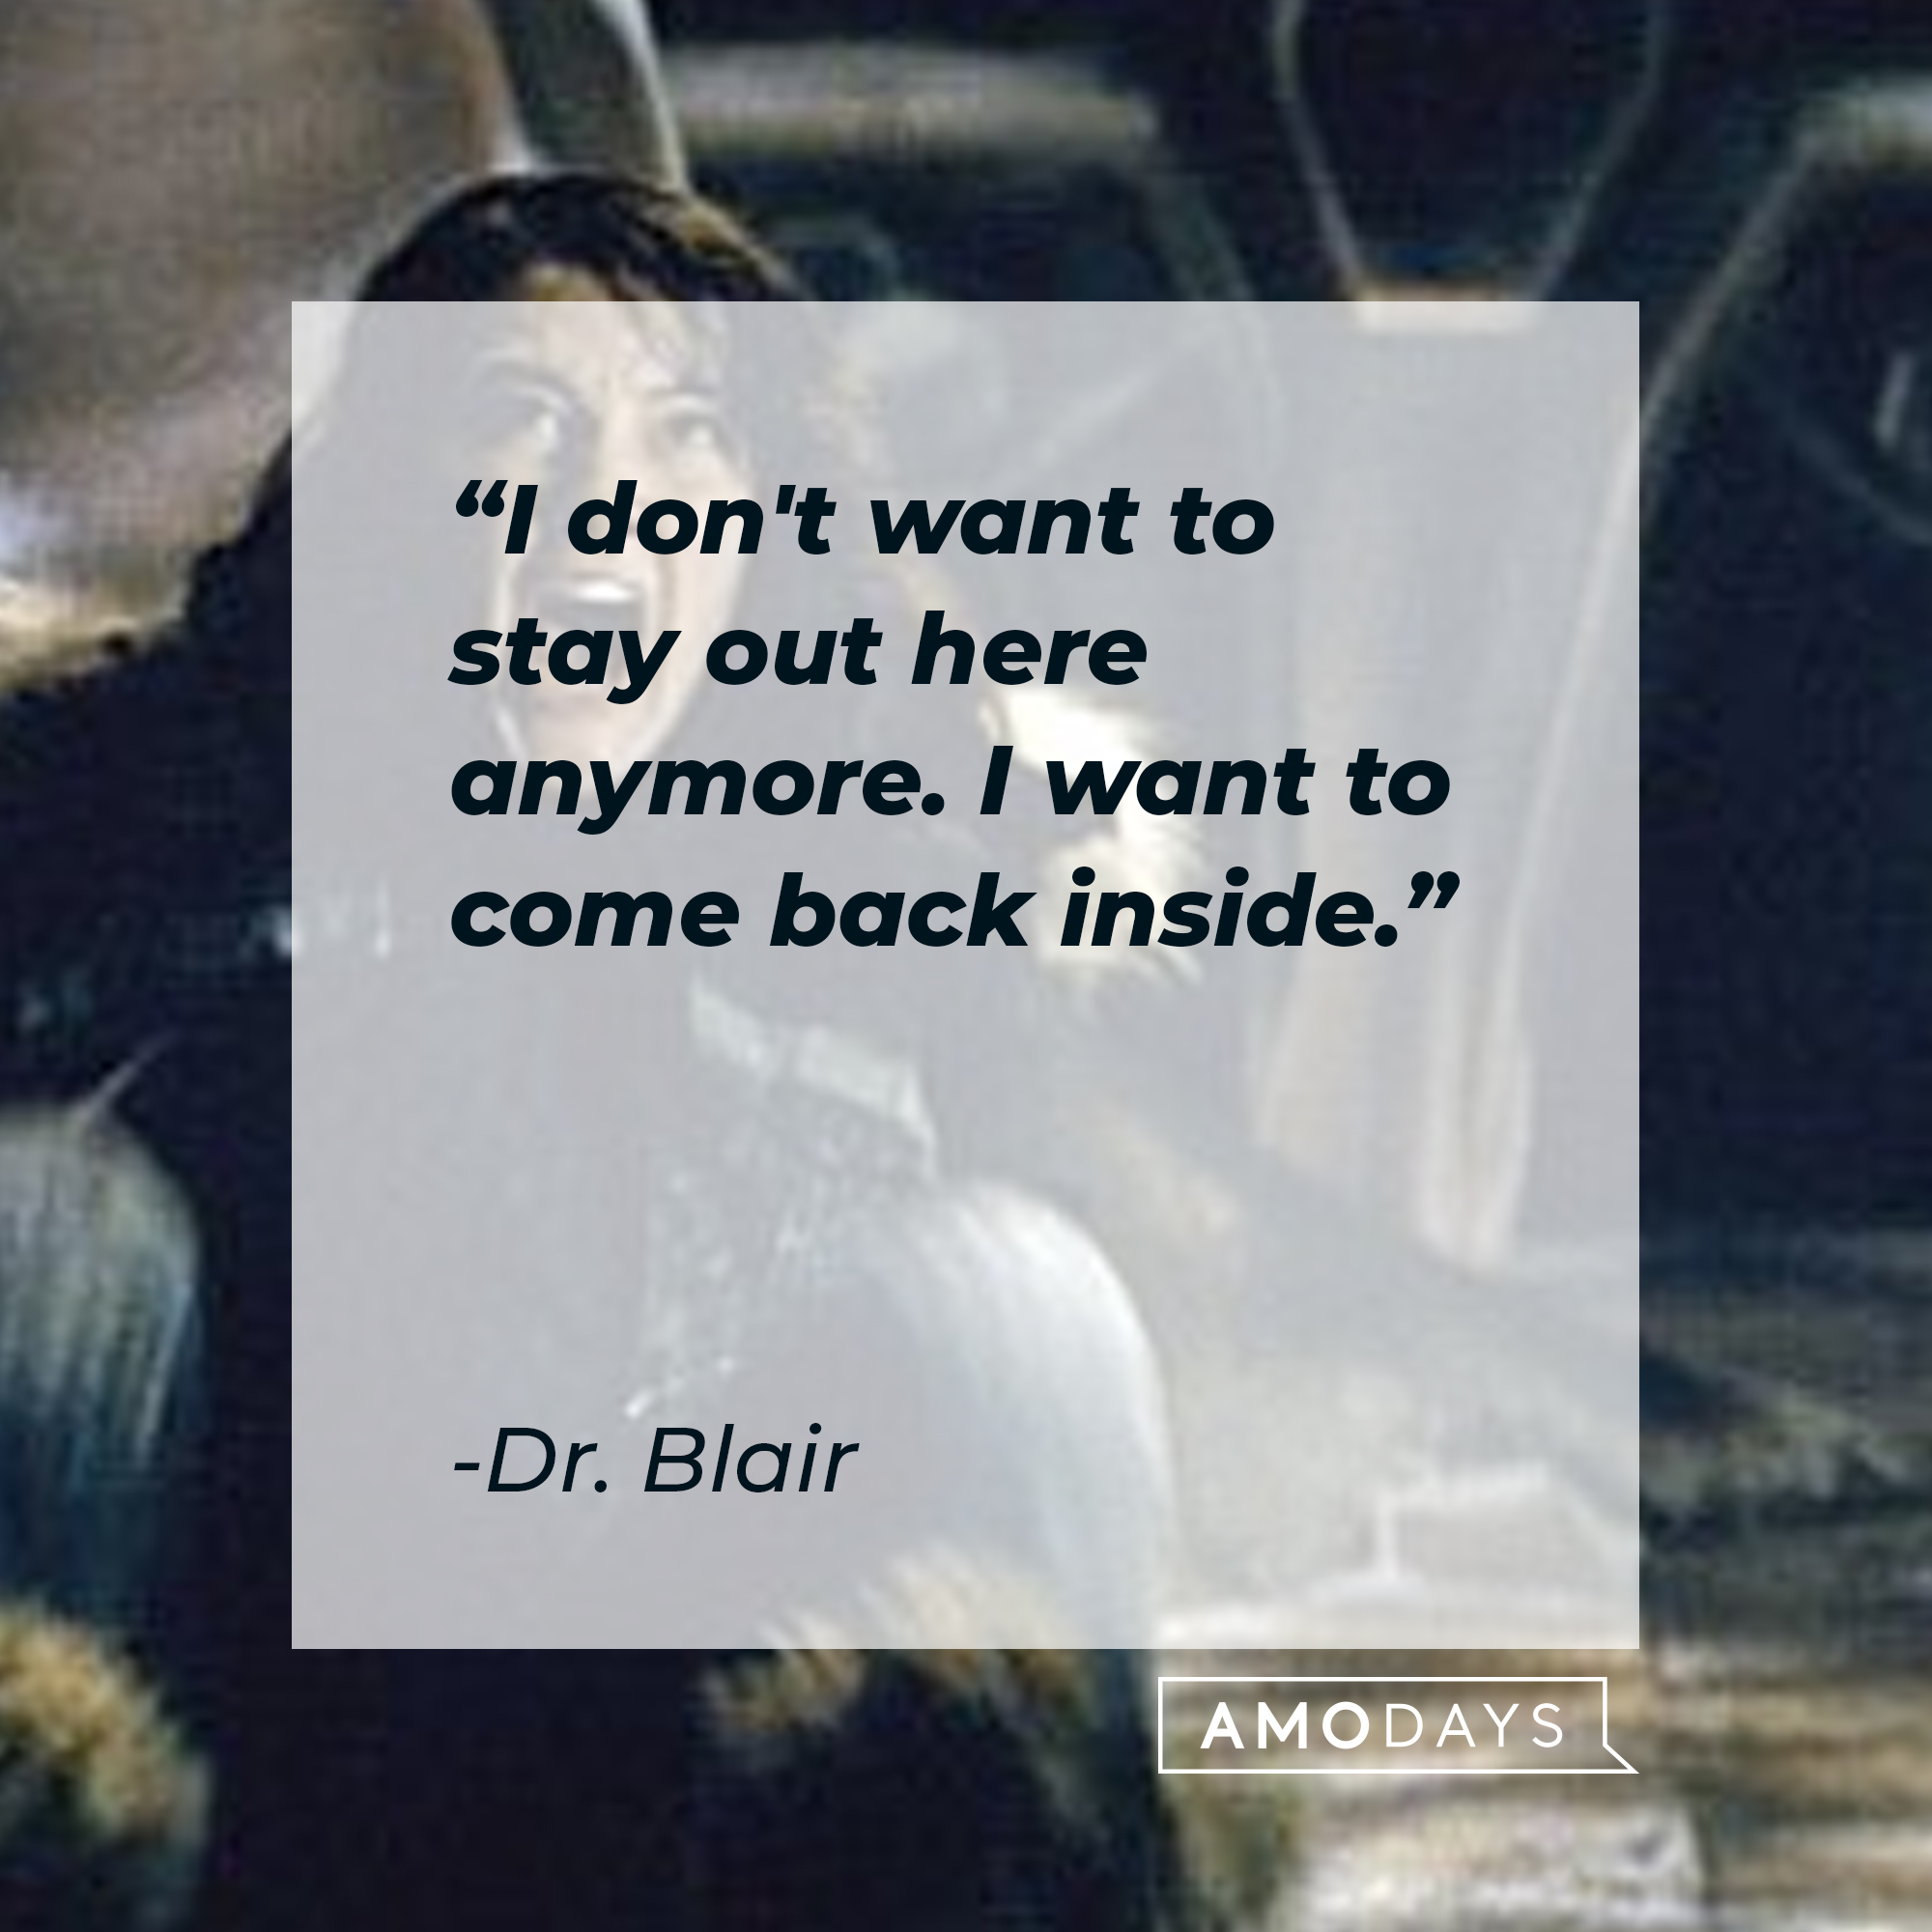 Dr. Blair's quote? "I don't want to stay out here anymore. I want to come back inside." | Source: facebook.com/thethingmovie